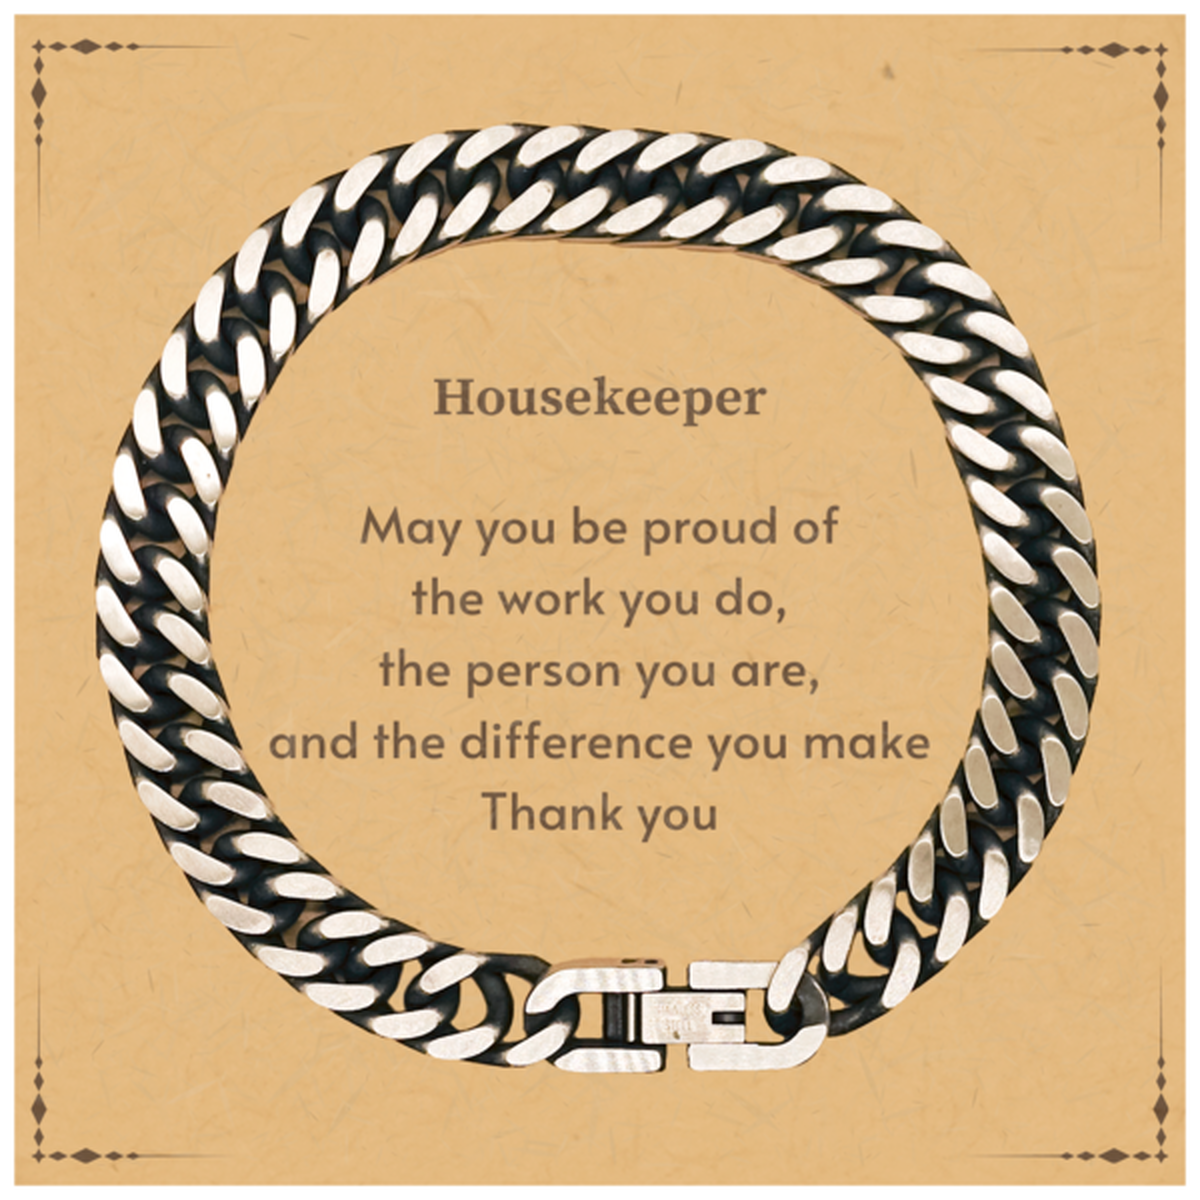 Heartwarming Cuban Link Chain Bracelet Retirement Coworkers Gifts for Housekeeper, Housekeeper May You be proud of the work you do, the person you are Gifts for Boss Men Women Friends